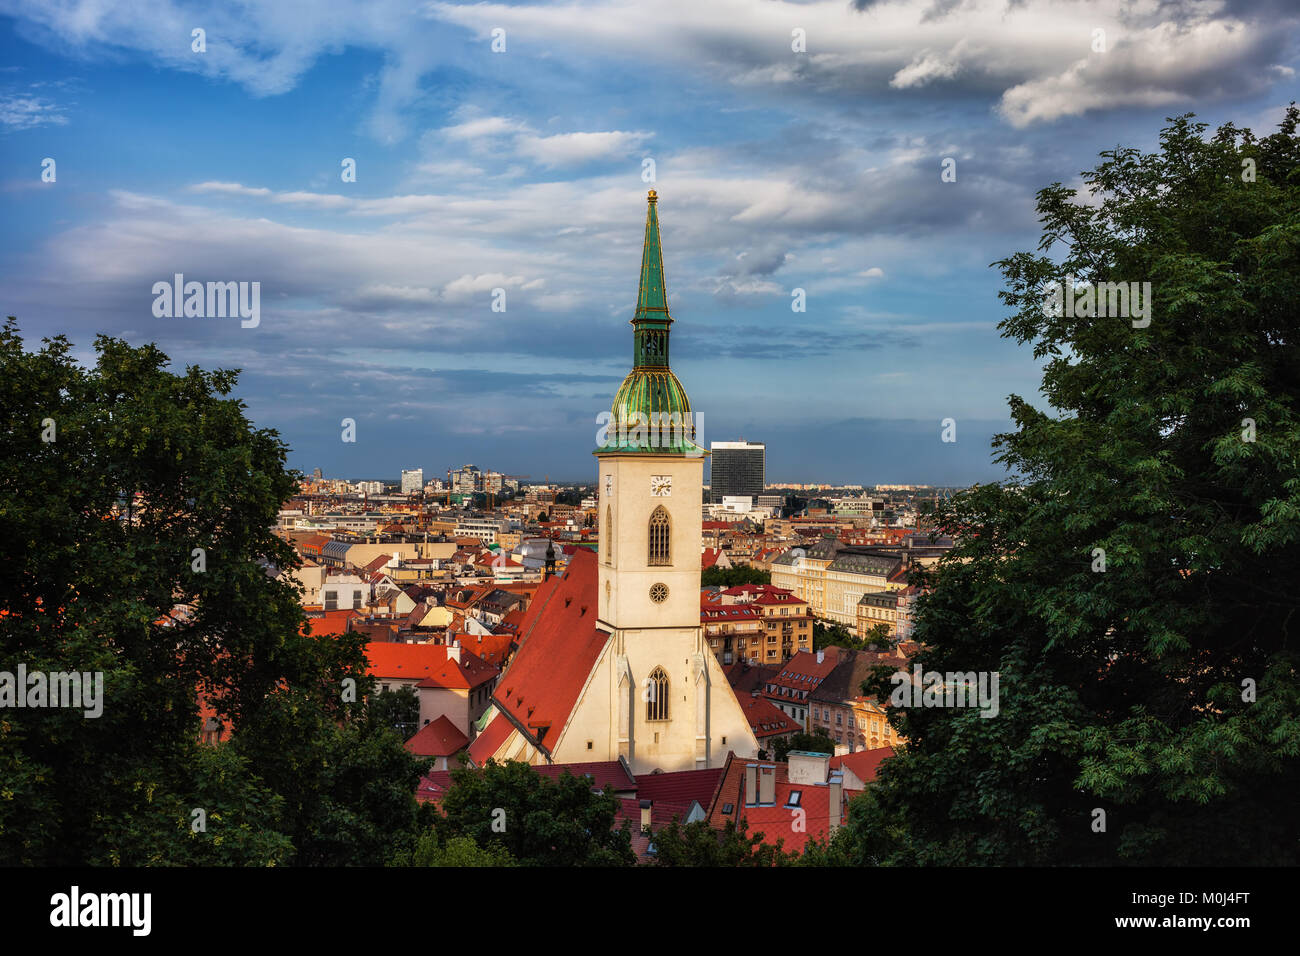 Bratislava at sunset, capital city of Slovakia picturesque cityscape with St Martin's Cathedral framed by the trees. Stock Photo